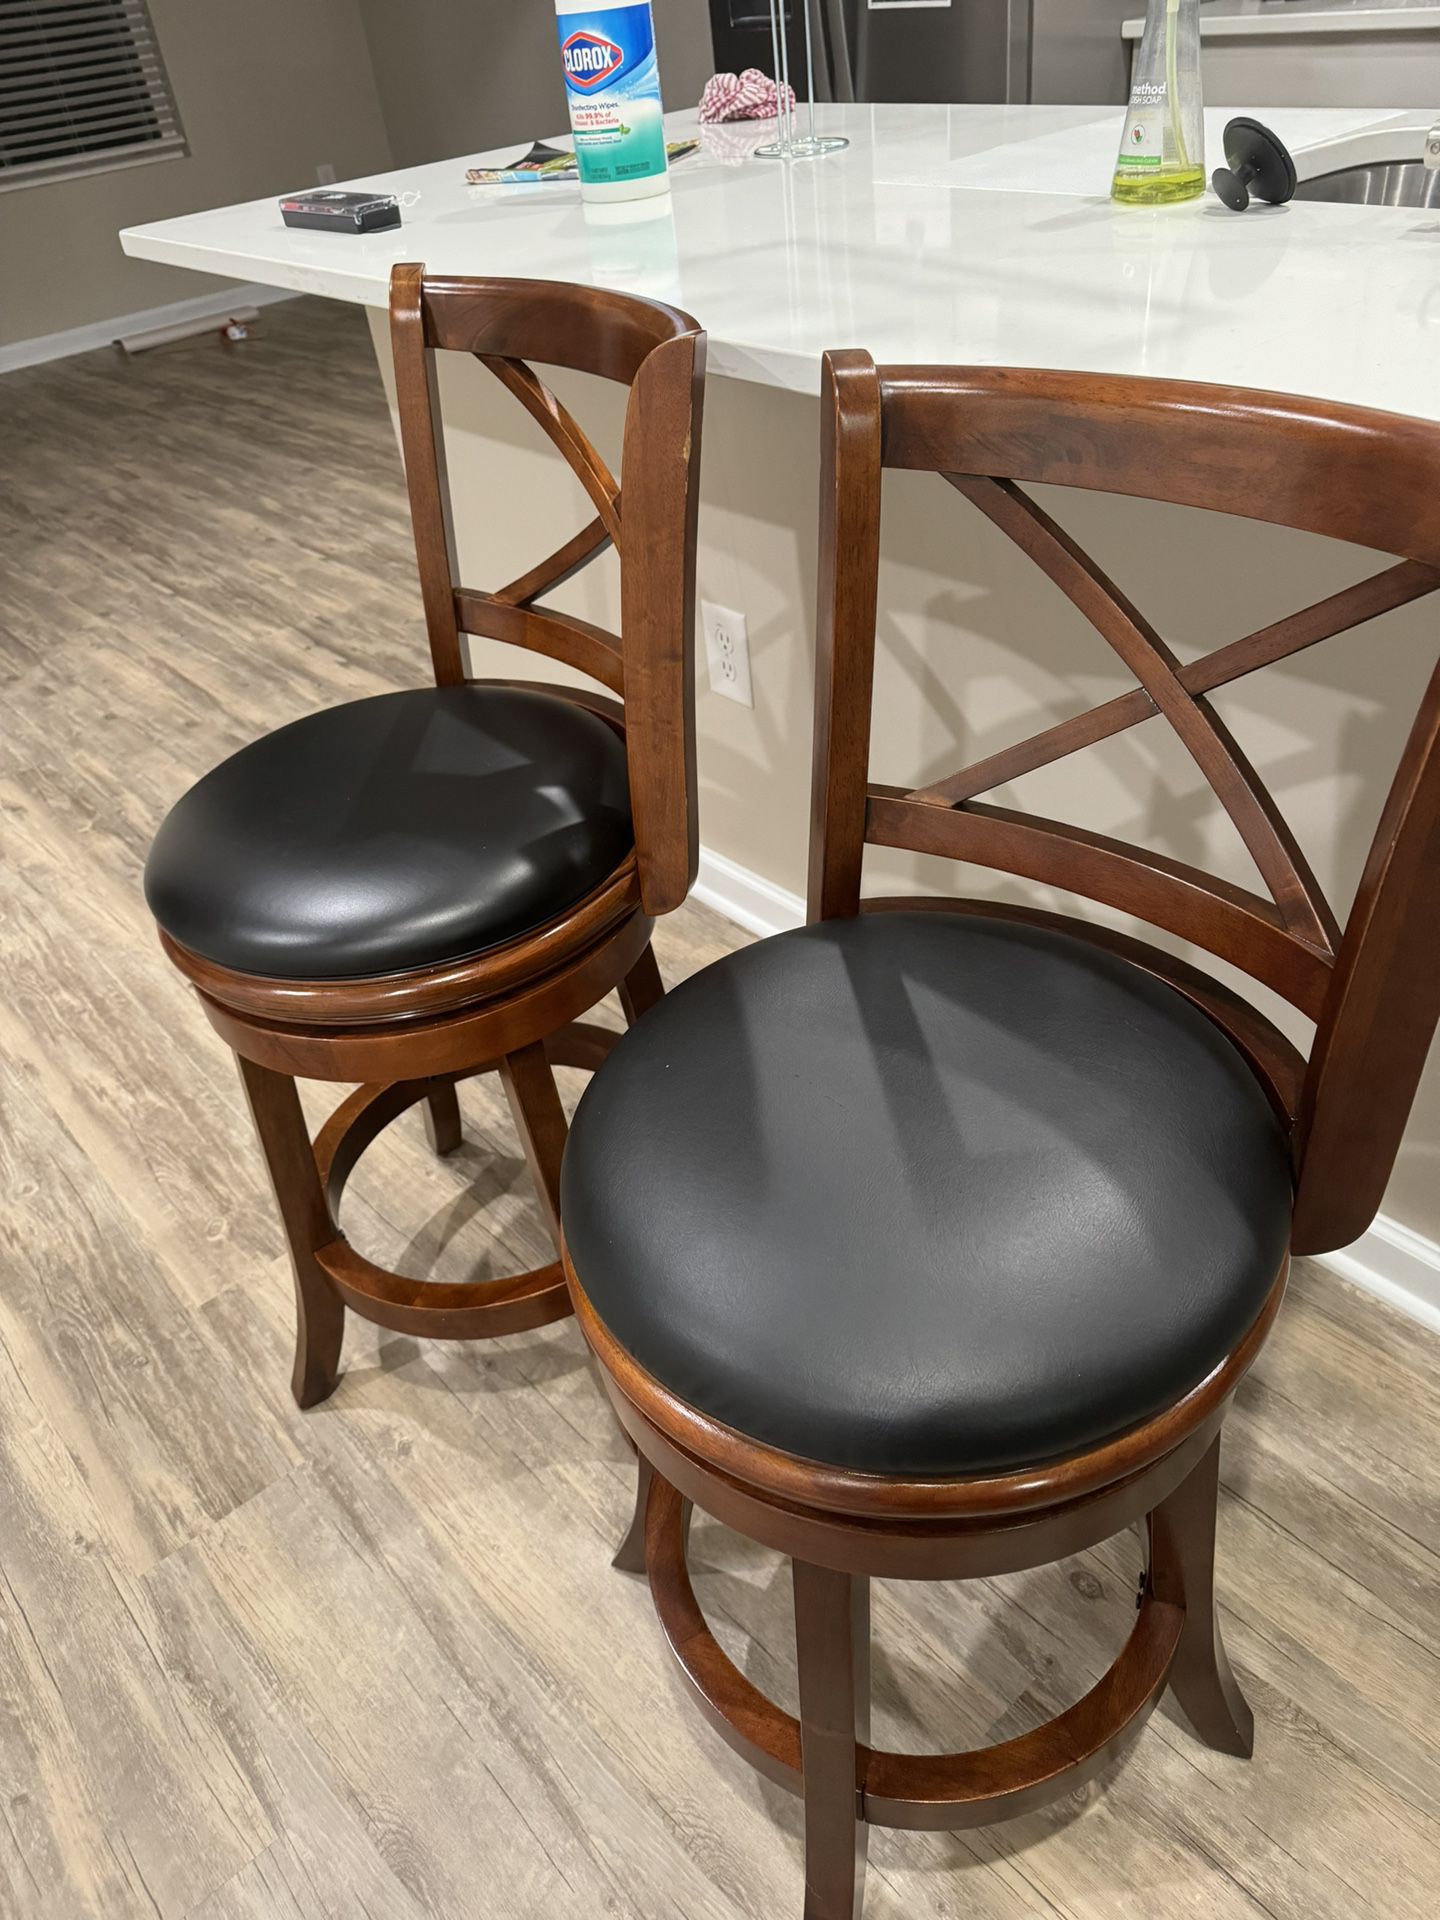 Counter Top Swivel Chairs